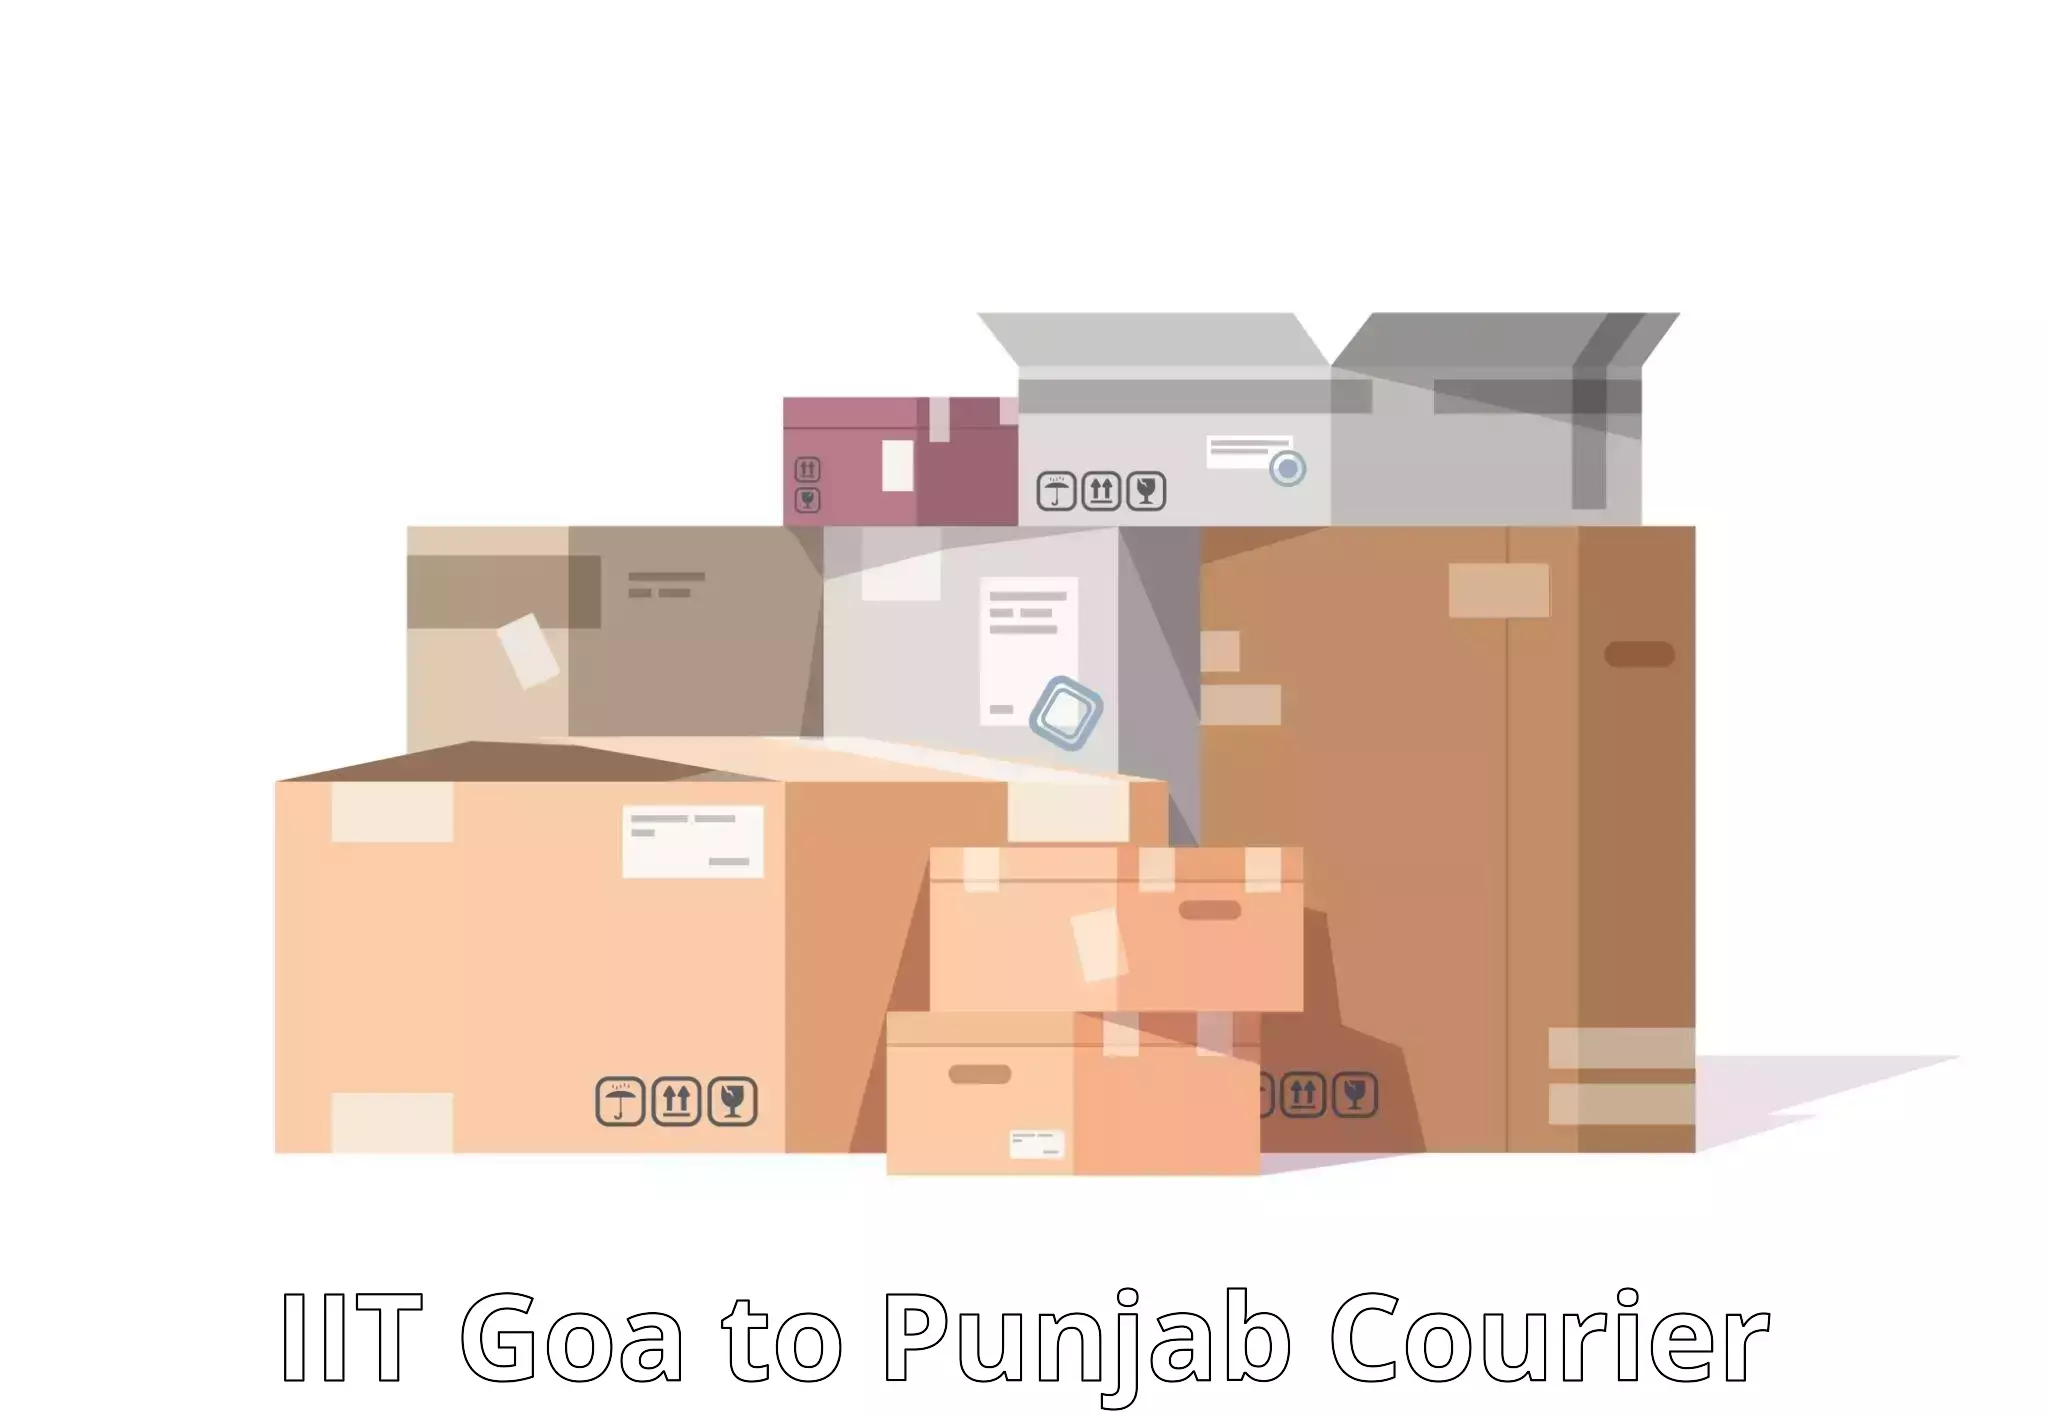 Easy access courier services IIT Goa to Central University of Punjab Bathinda